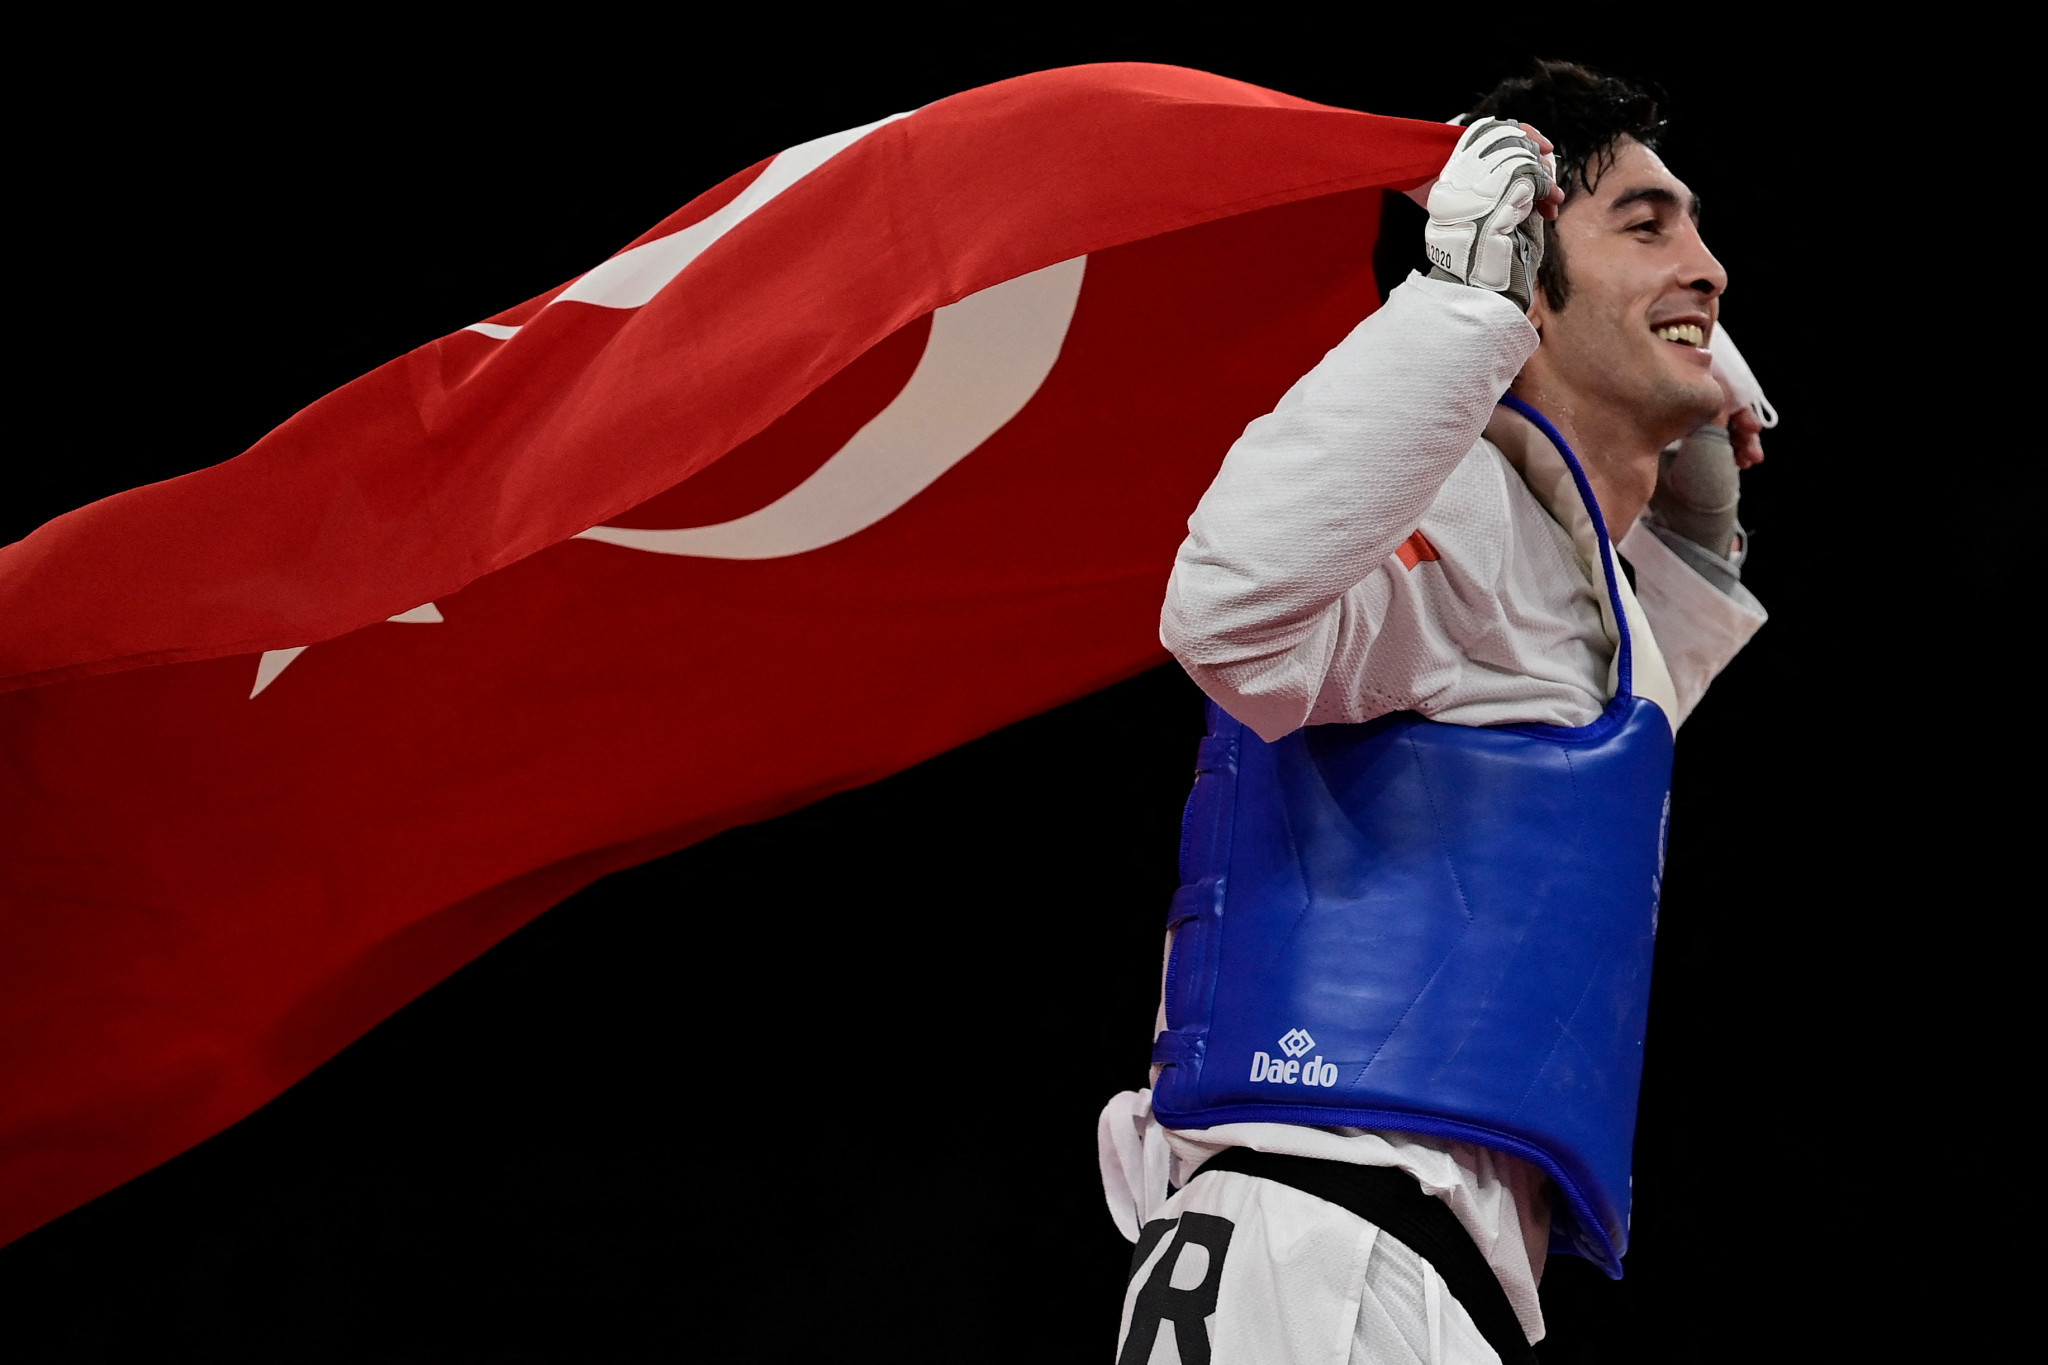 Hakan Reçber retained his men's under-63kg title at the European Taekwondo Championships ©Getty Images